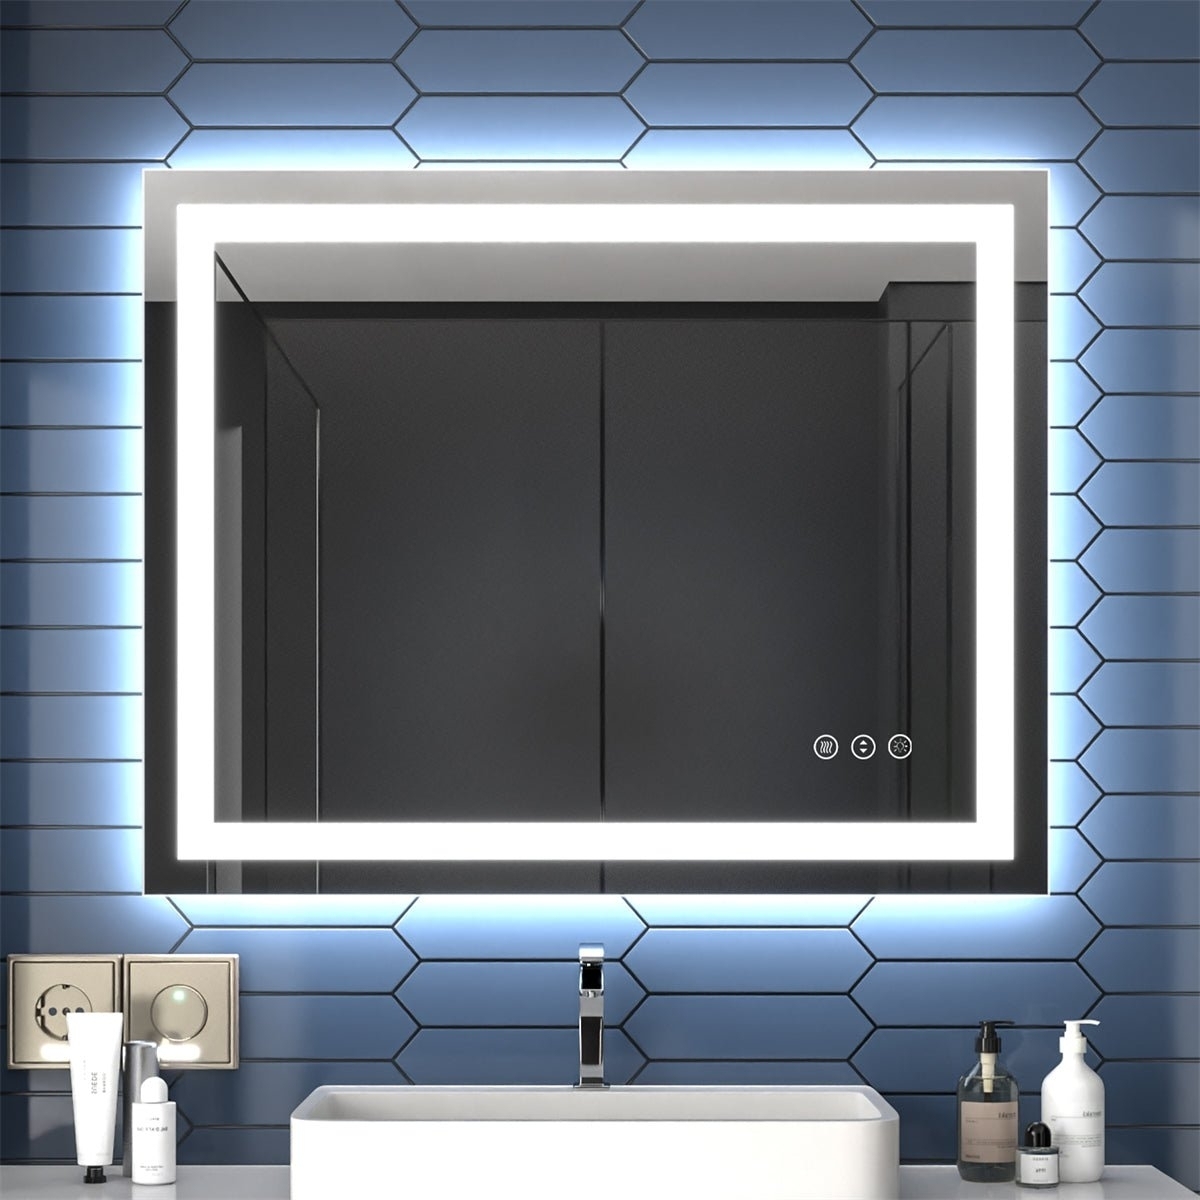 Apex 40 W X 32 H LED Bathroom Light Mirror,Anti Fog,Dimmable,Dual Lighting Mode,Tempered Glass